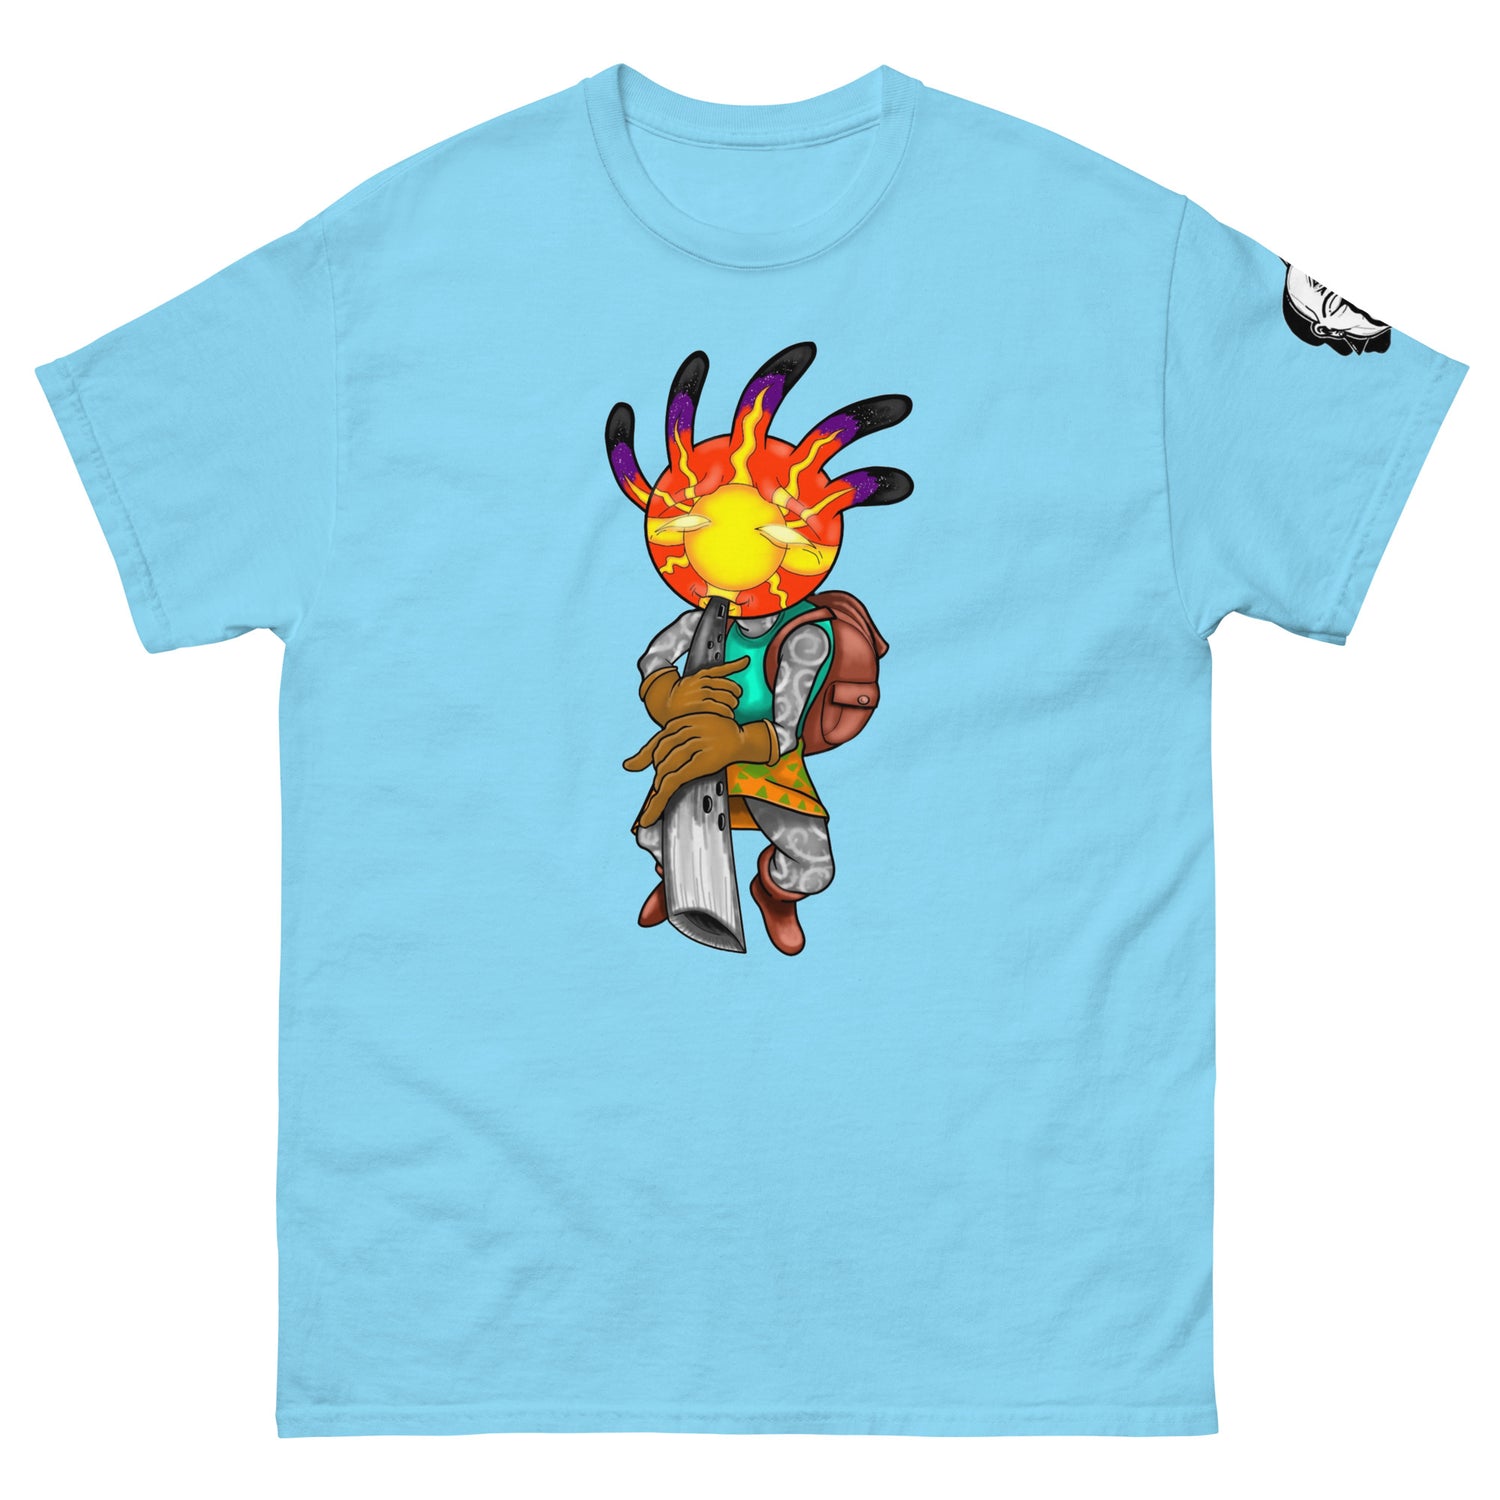 "KOKOPELLI" by INSPIRE x @reaper.renaissance 🎶 🏜️Designed for @renaissance_and_rendezvous.  Kokopelli, Native American, Native Inspired, Little People, Little Person, Magic, Symbolism, Esoteric, Kiva, Rain-Maker, Money, Prosperity, Inspire, FXBG, Fredericksburg, Renaissance, Rendezvous, Fertility, Music, Clothing, Swag, Cool,  Gifts, Dope, One of a kind, unique, tan, sand, nature, storms, wind maker, 